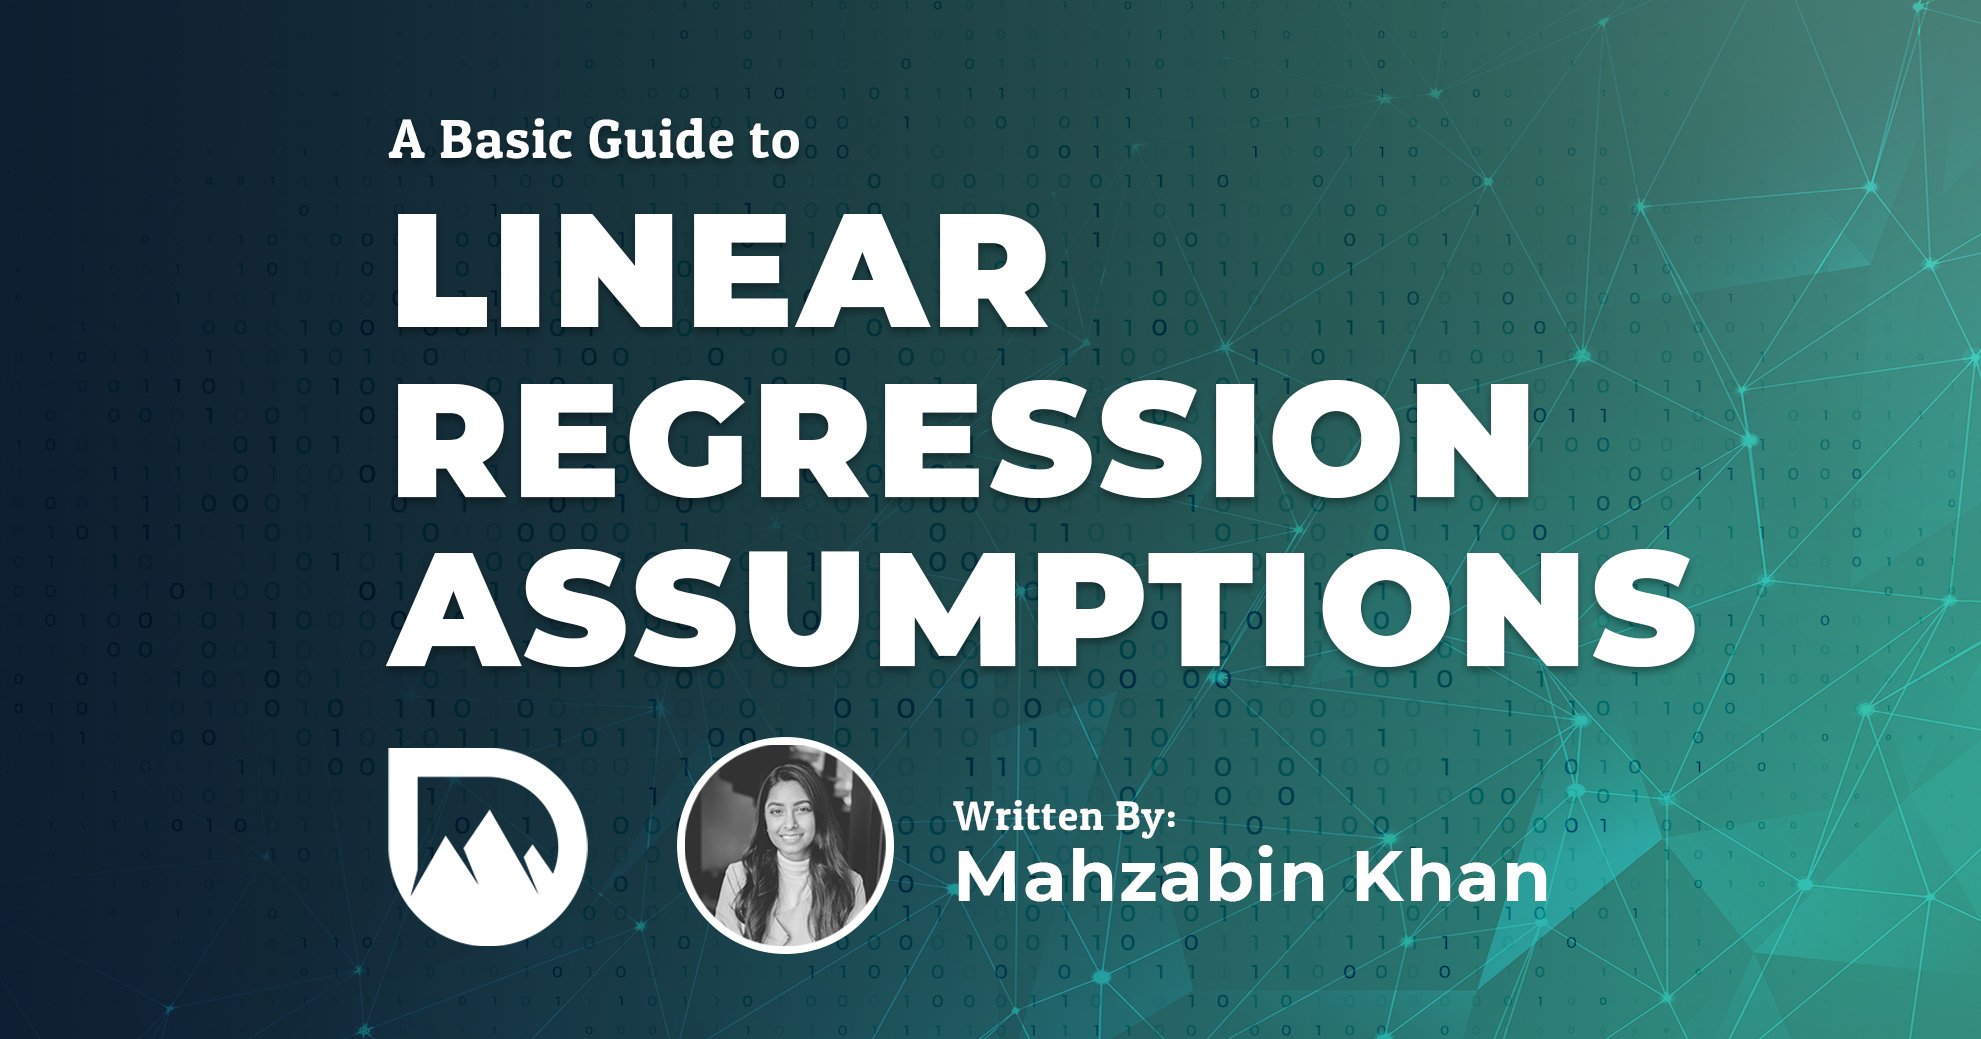 A Basic Guide to Linear Regression Assumptions by Mahzabin Khan